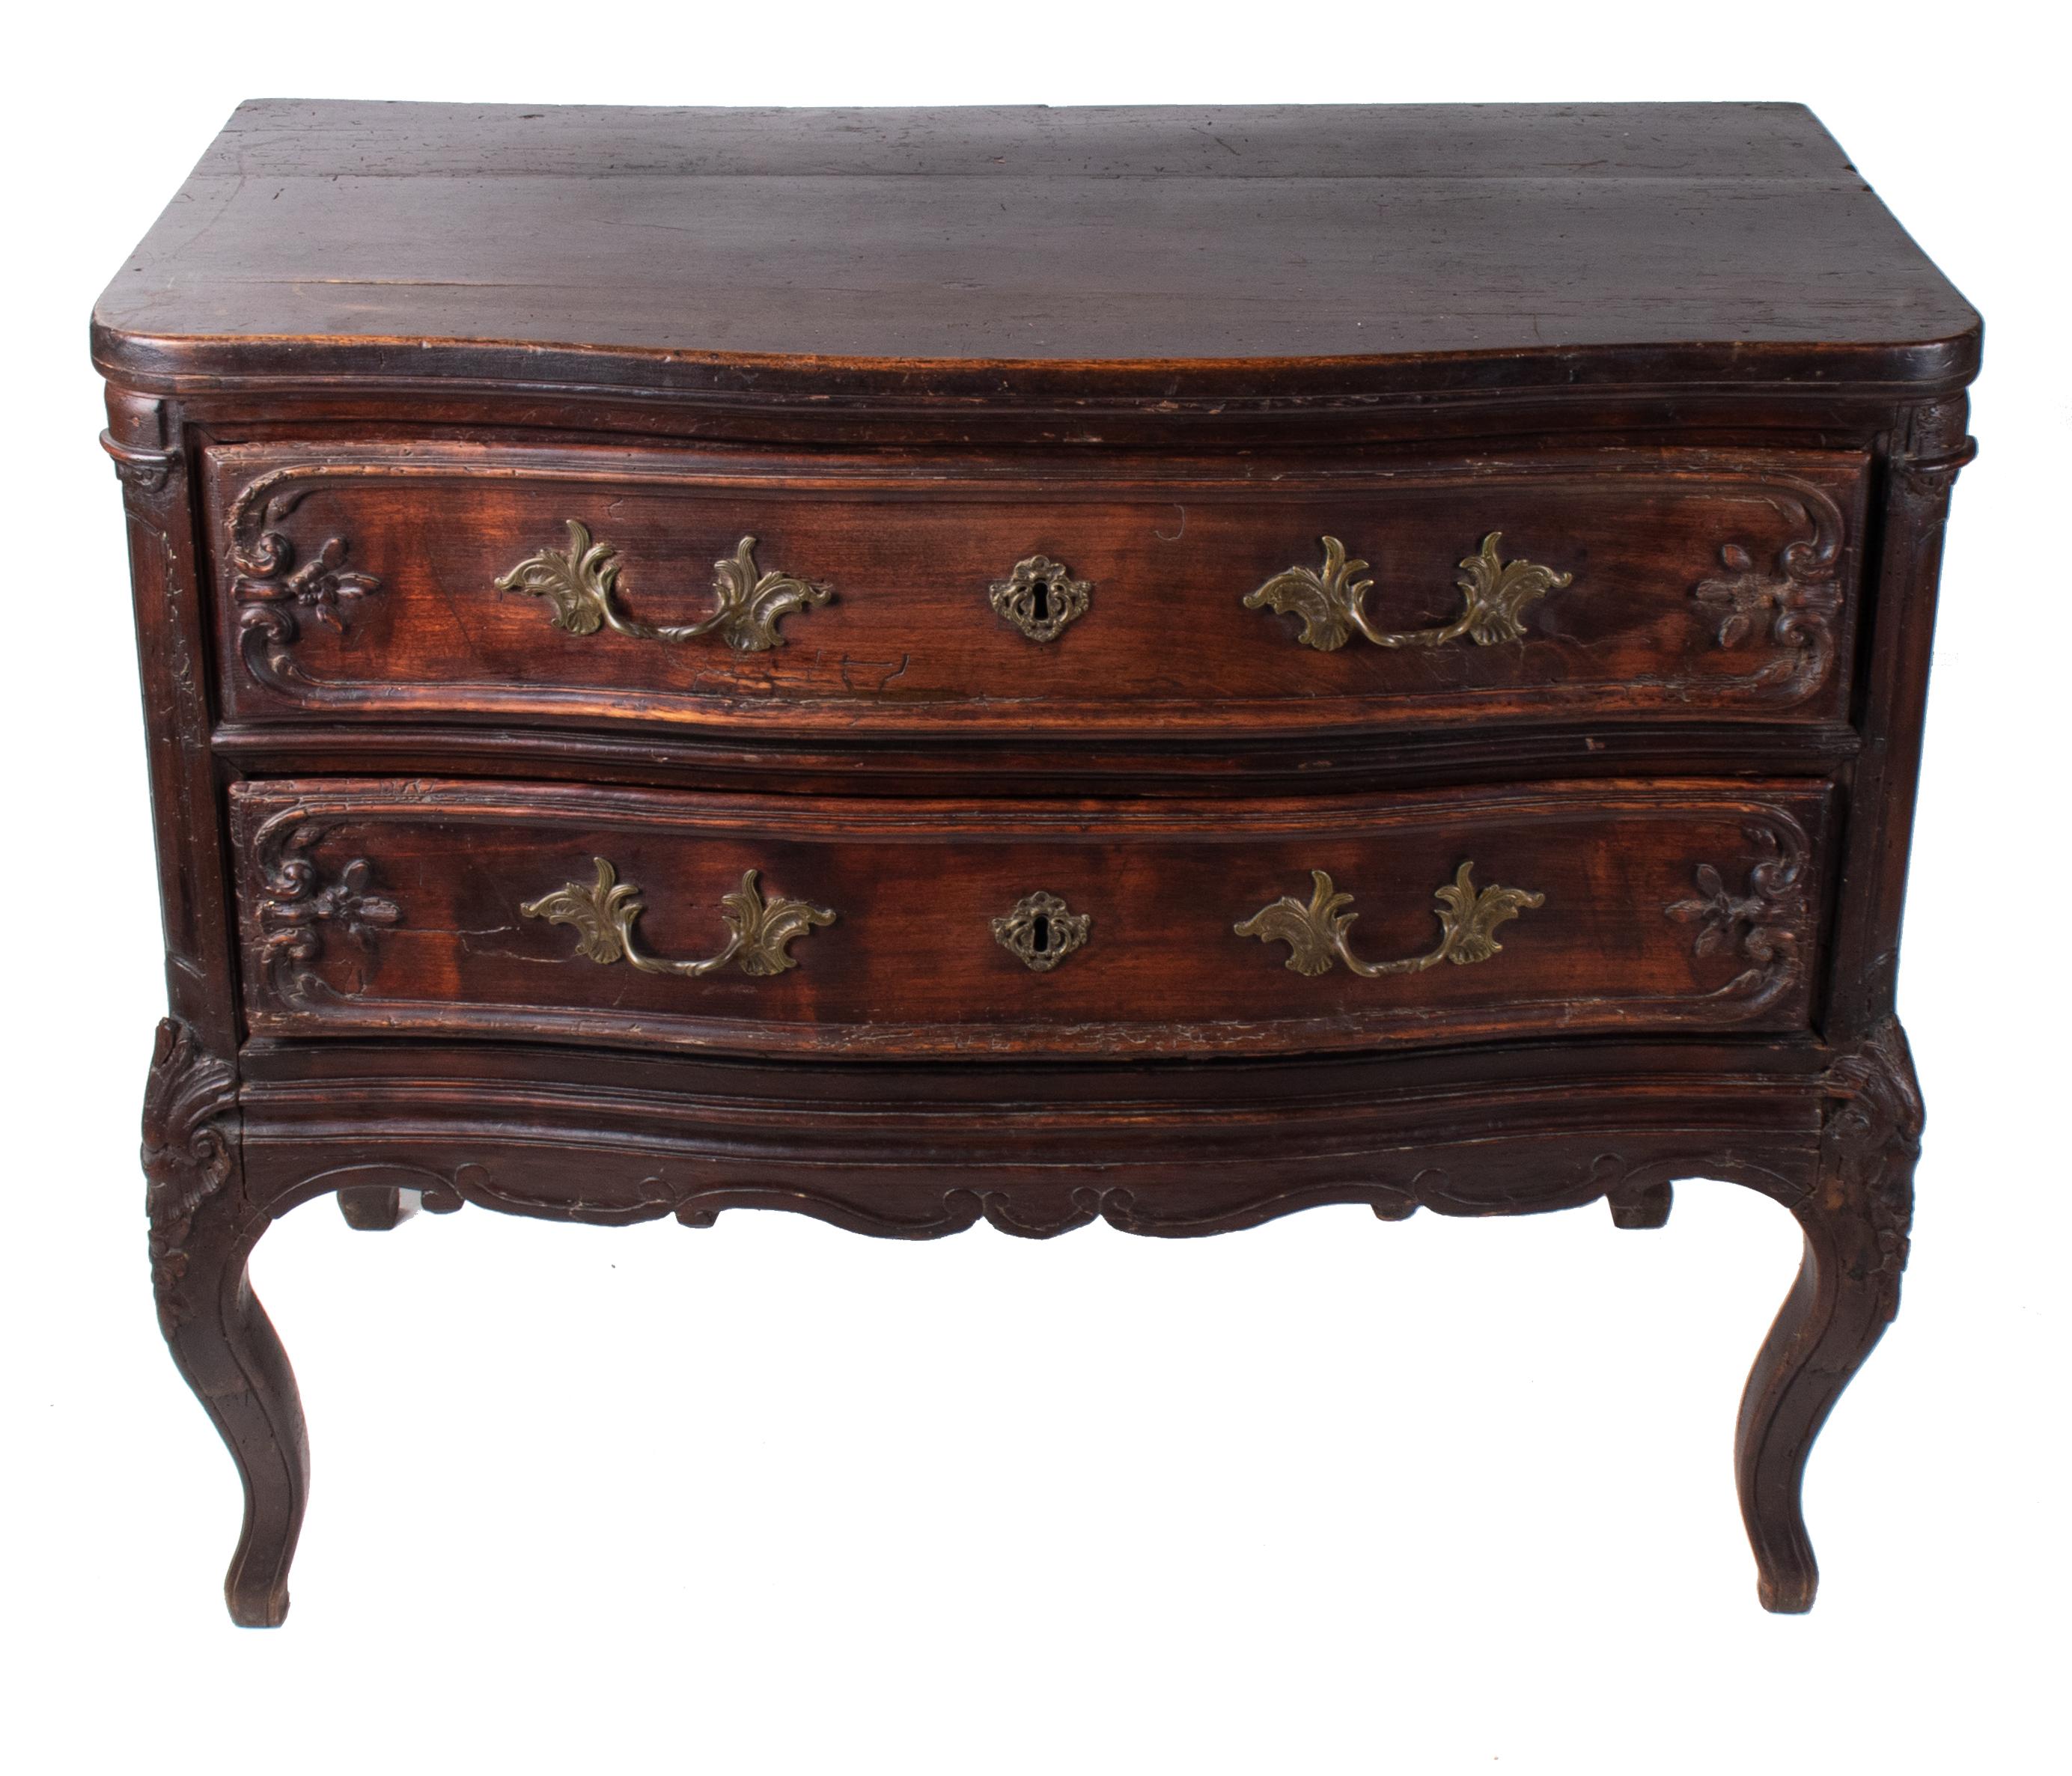 18th century French two drawer commode with brass fittings.